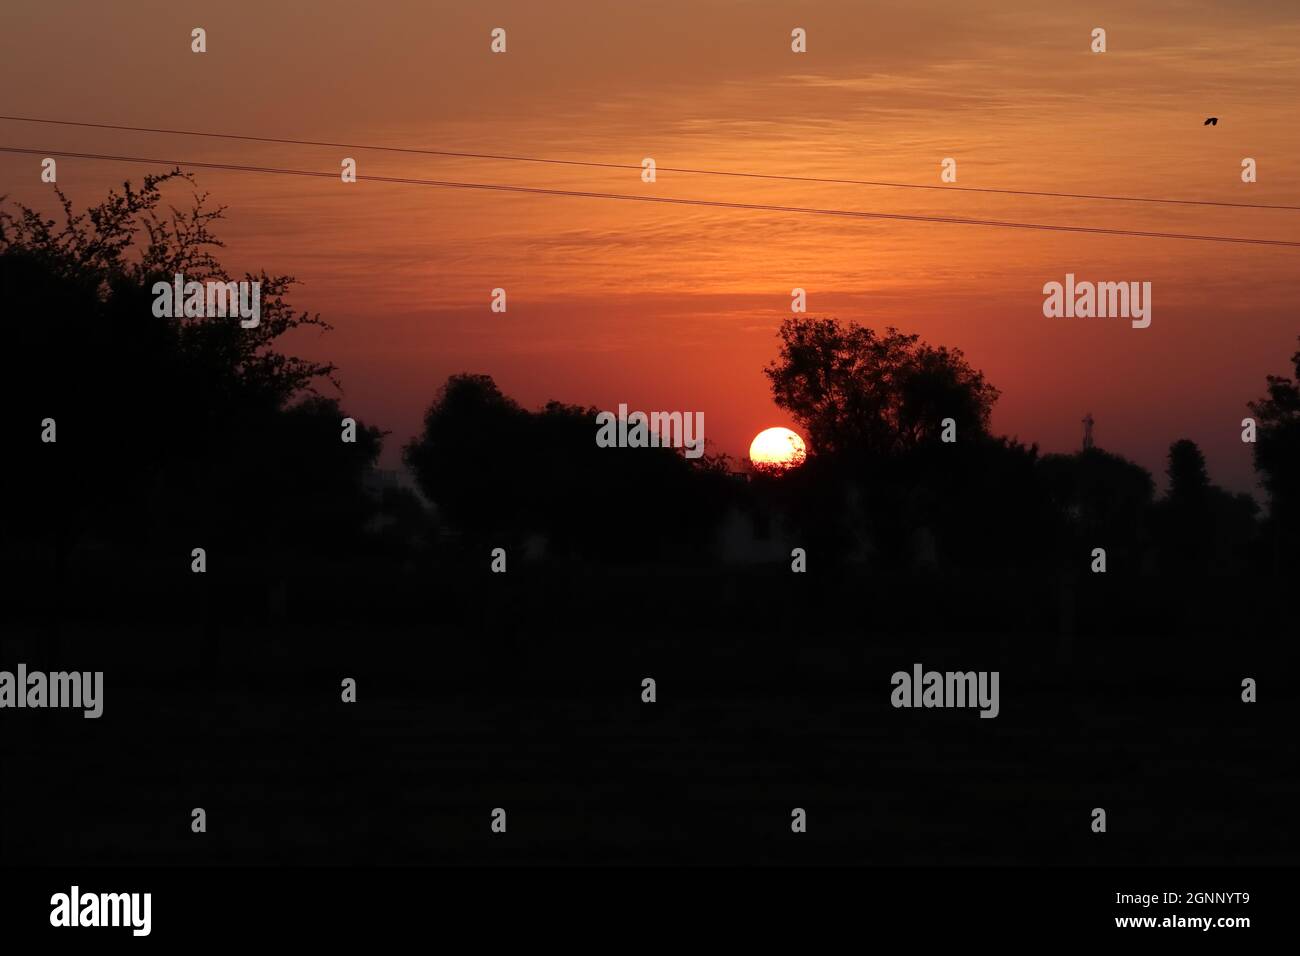 landscape Photograph of a sunrise with a dazzling half-sun entering the sky out of a silhouette hillside and a silhouette bush of wild trees Stock Photo